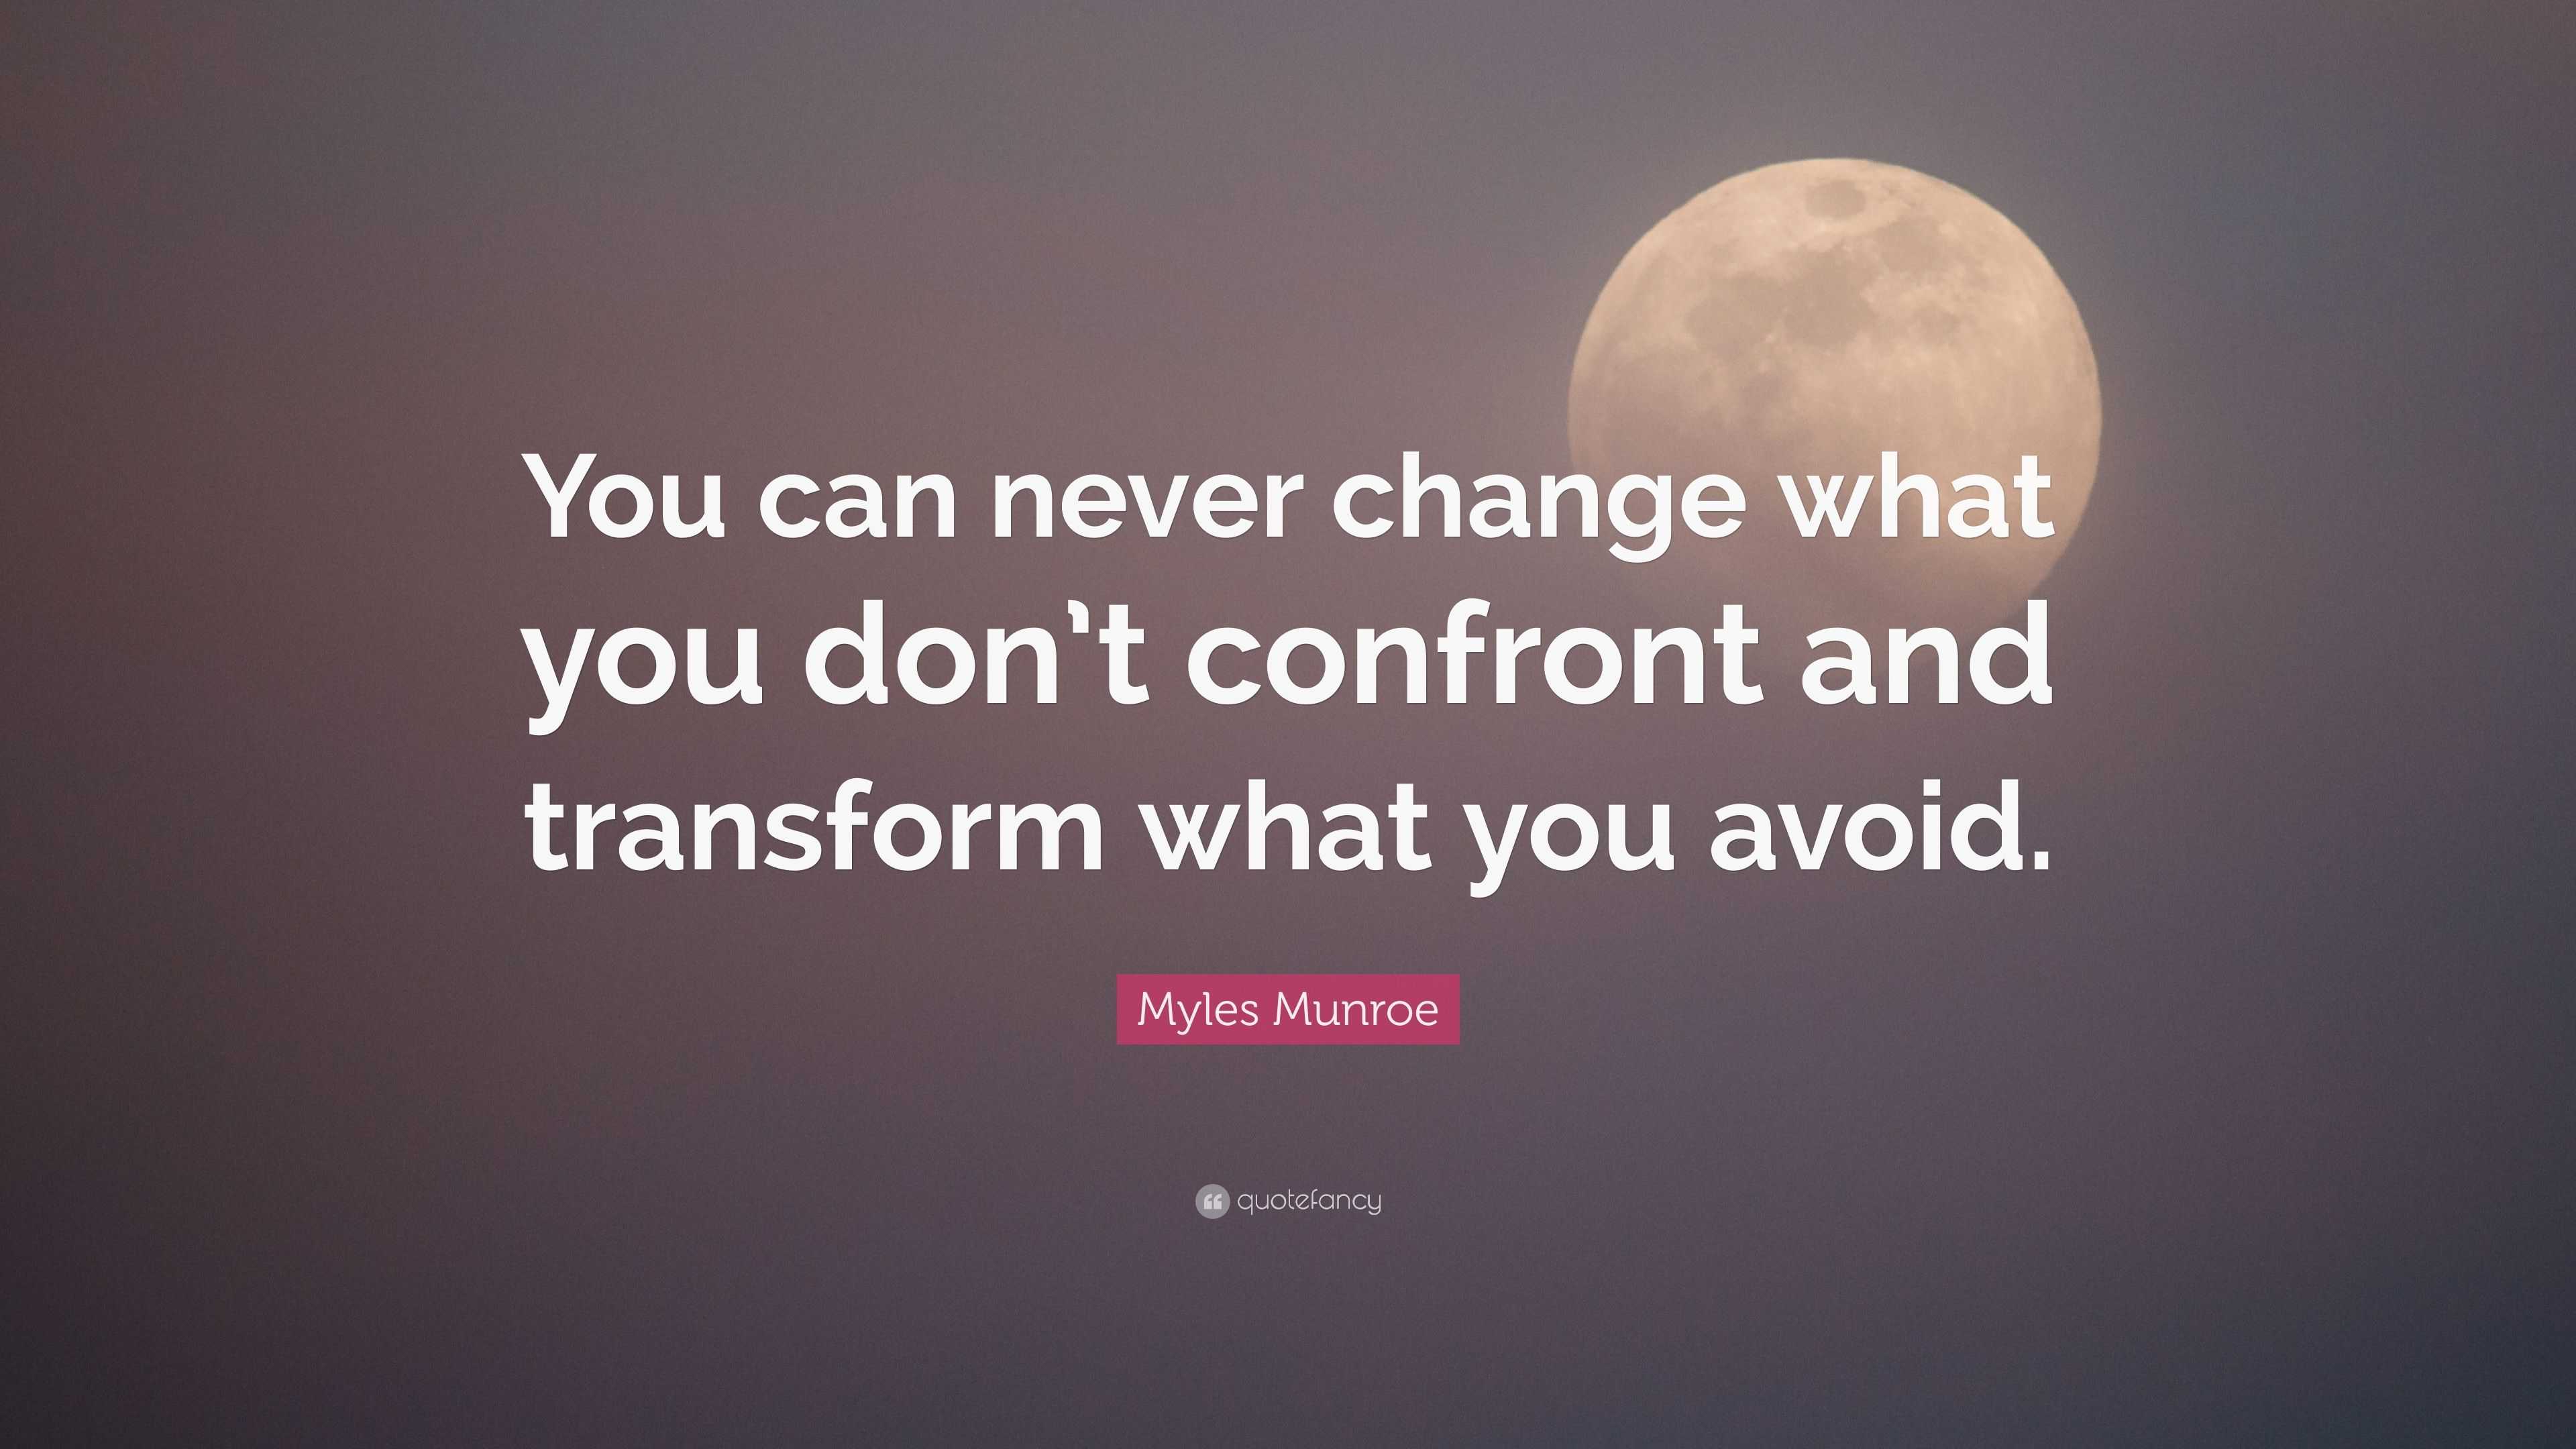 Myles Munroe Quote: “You can never change what you don’t confront and ...